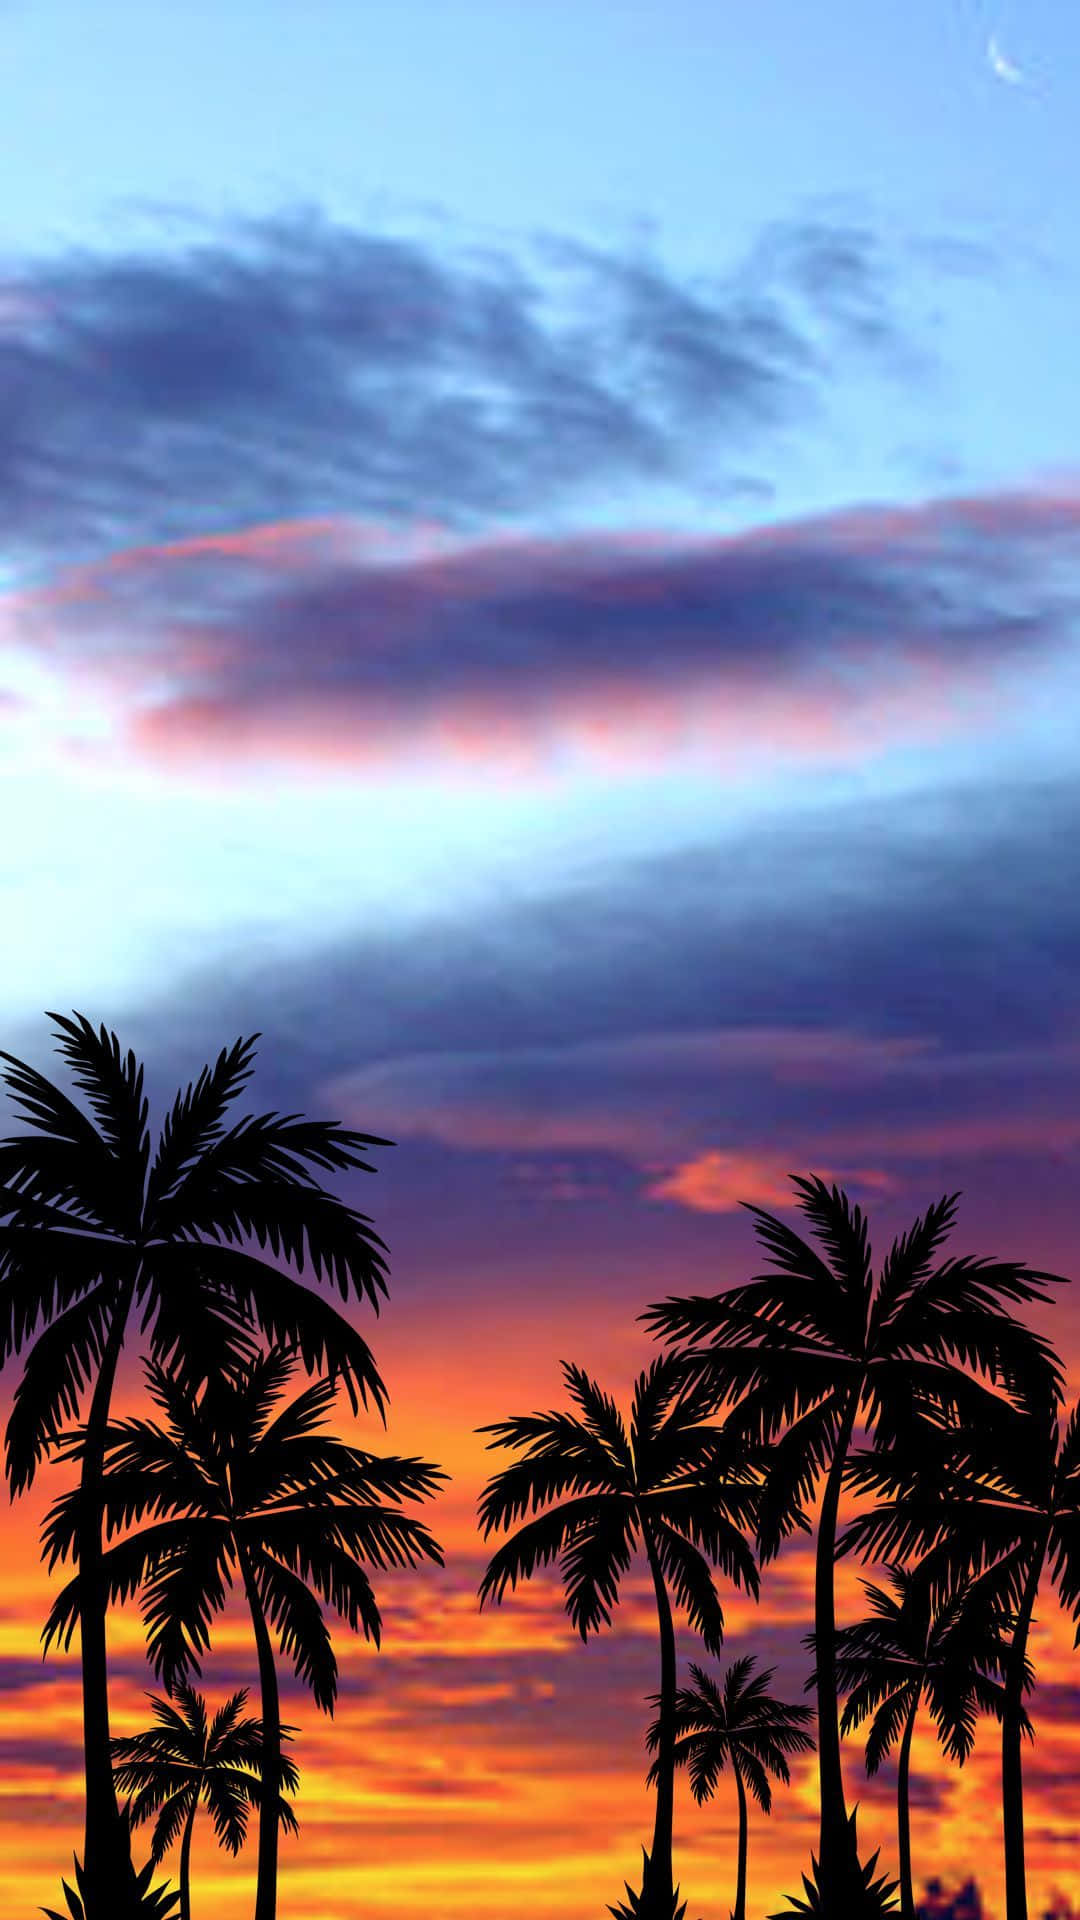 Aesthetic Sunset Iphone With Colorful Vibrant Skies Wallpaper